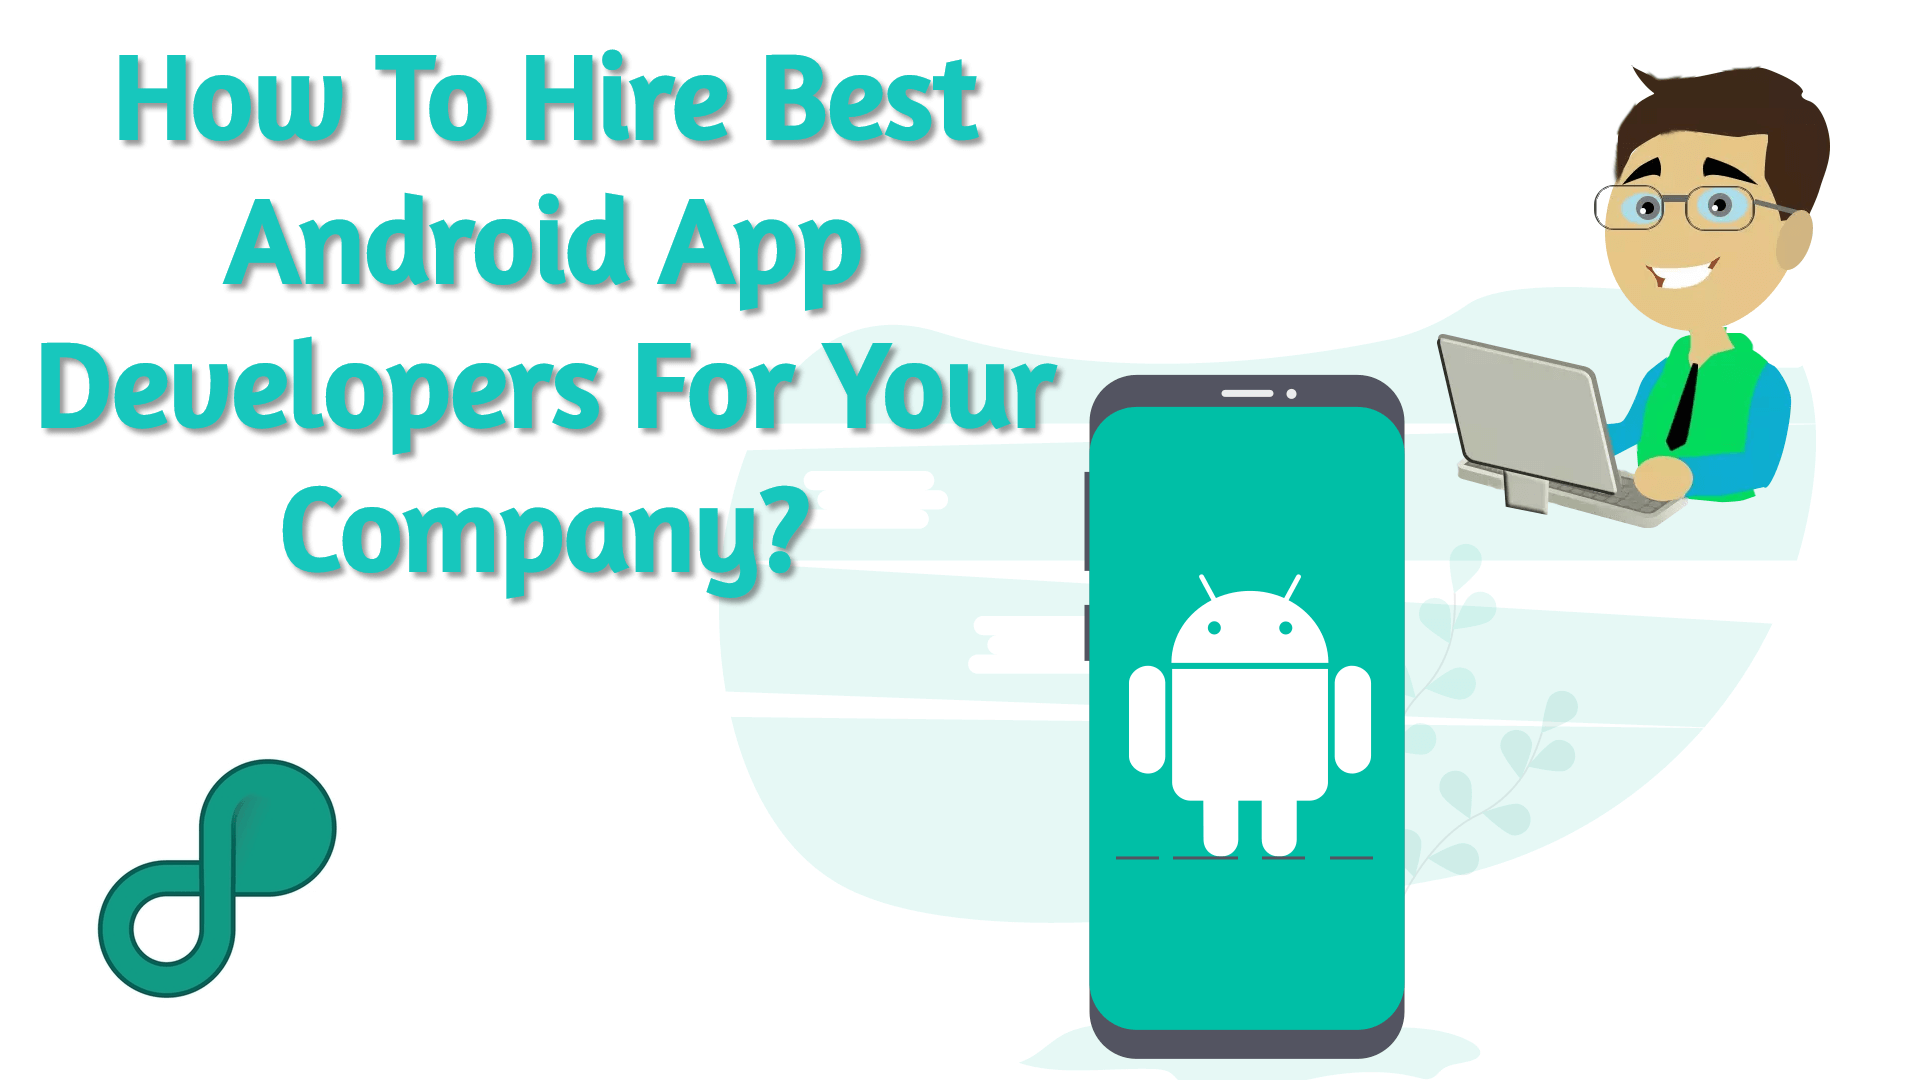 how to hire android app developer for your company in 2020 - 2021